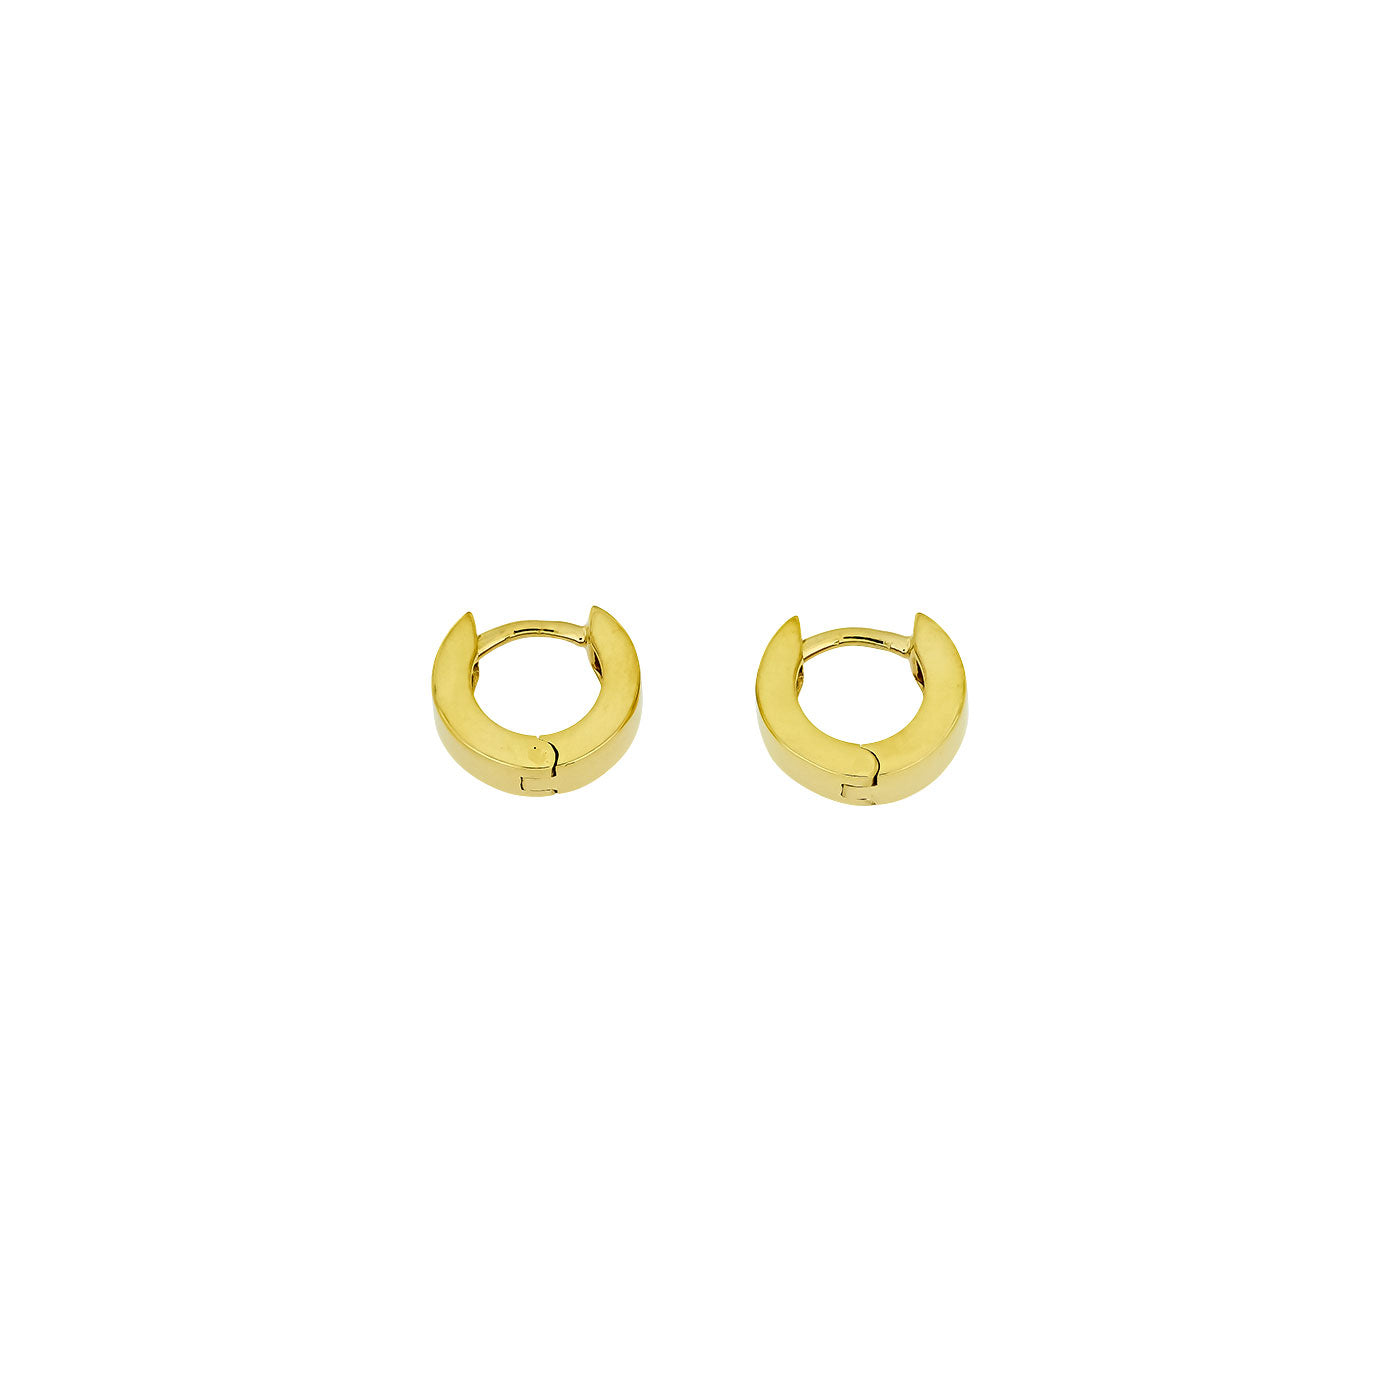 9 Carat Gold Hinged Hoops - Small Squared